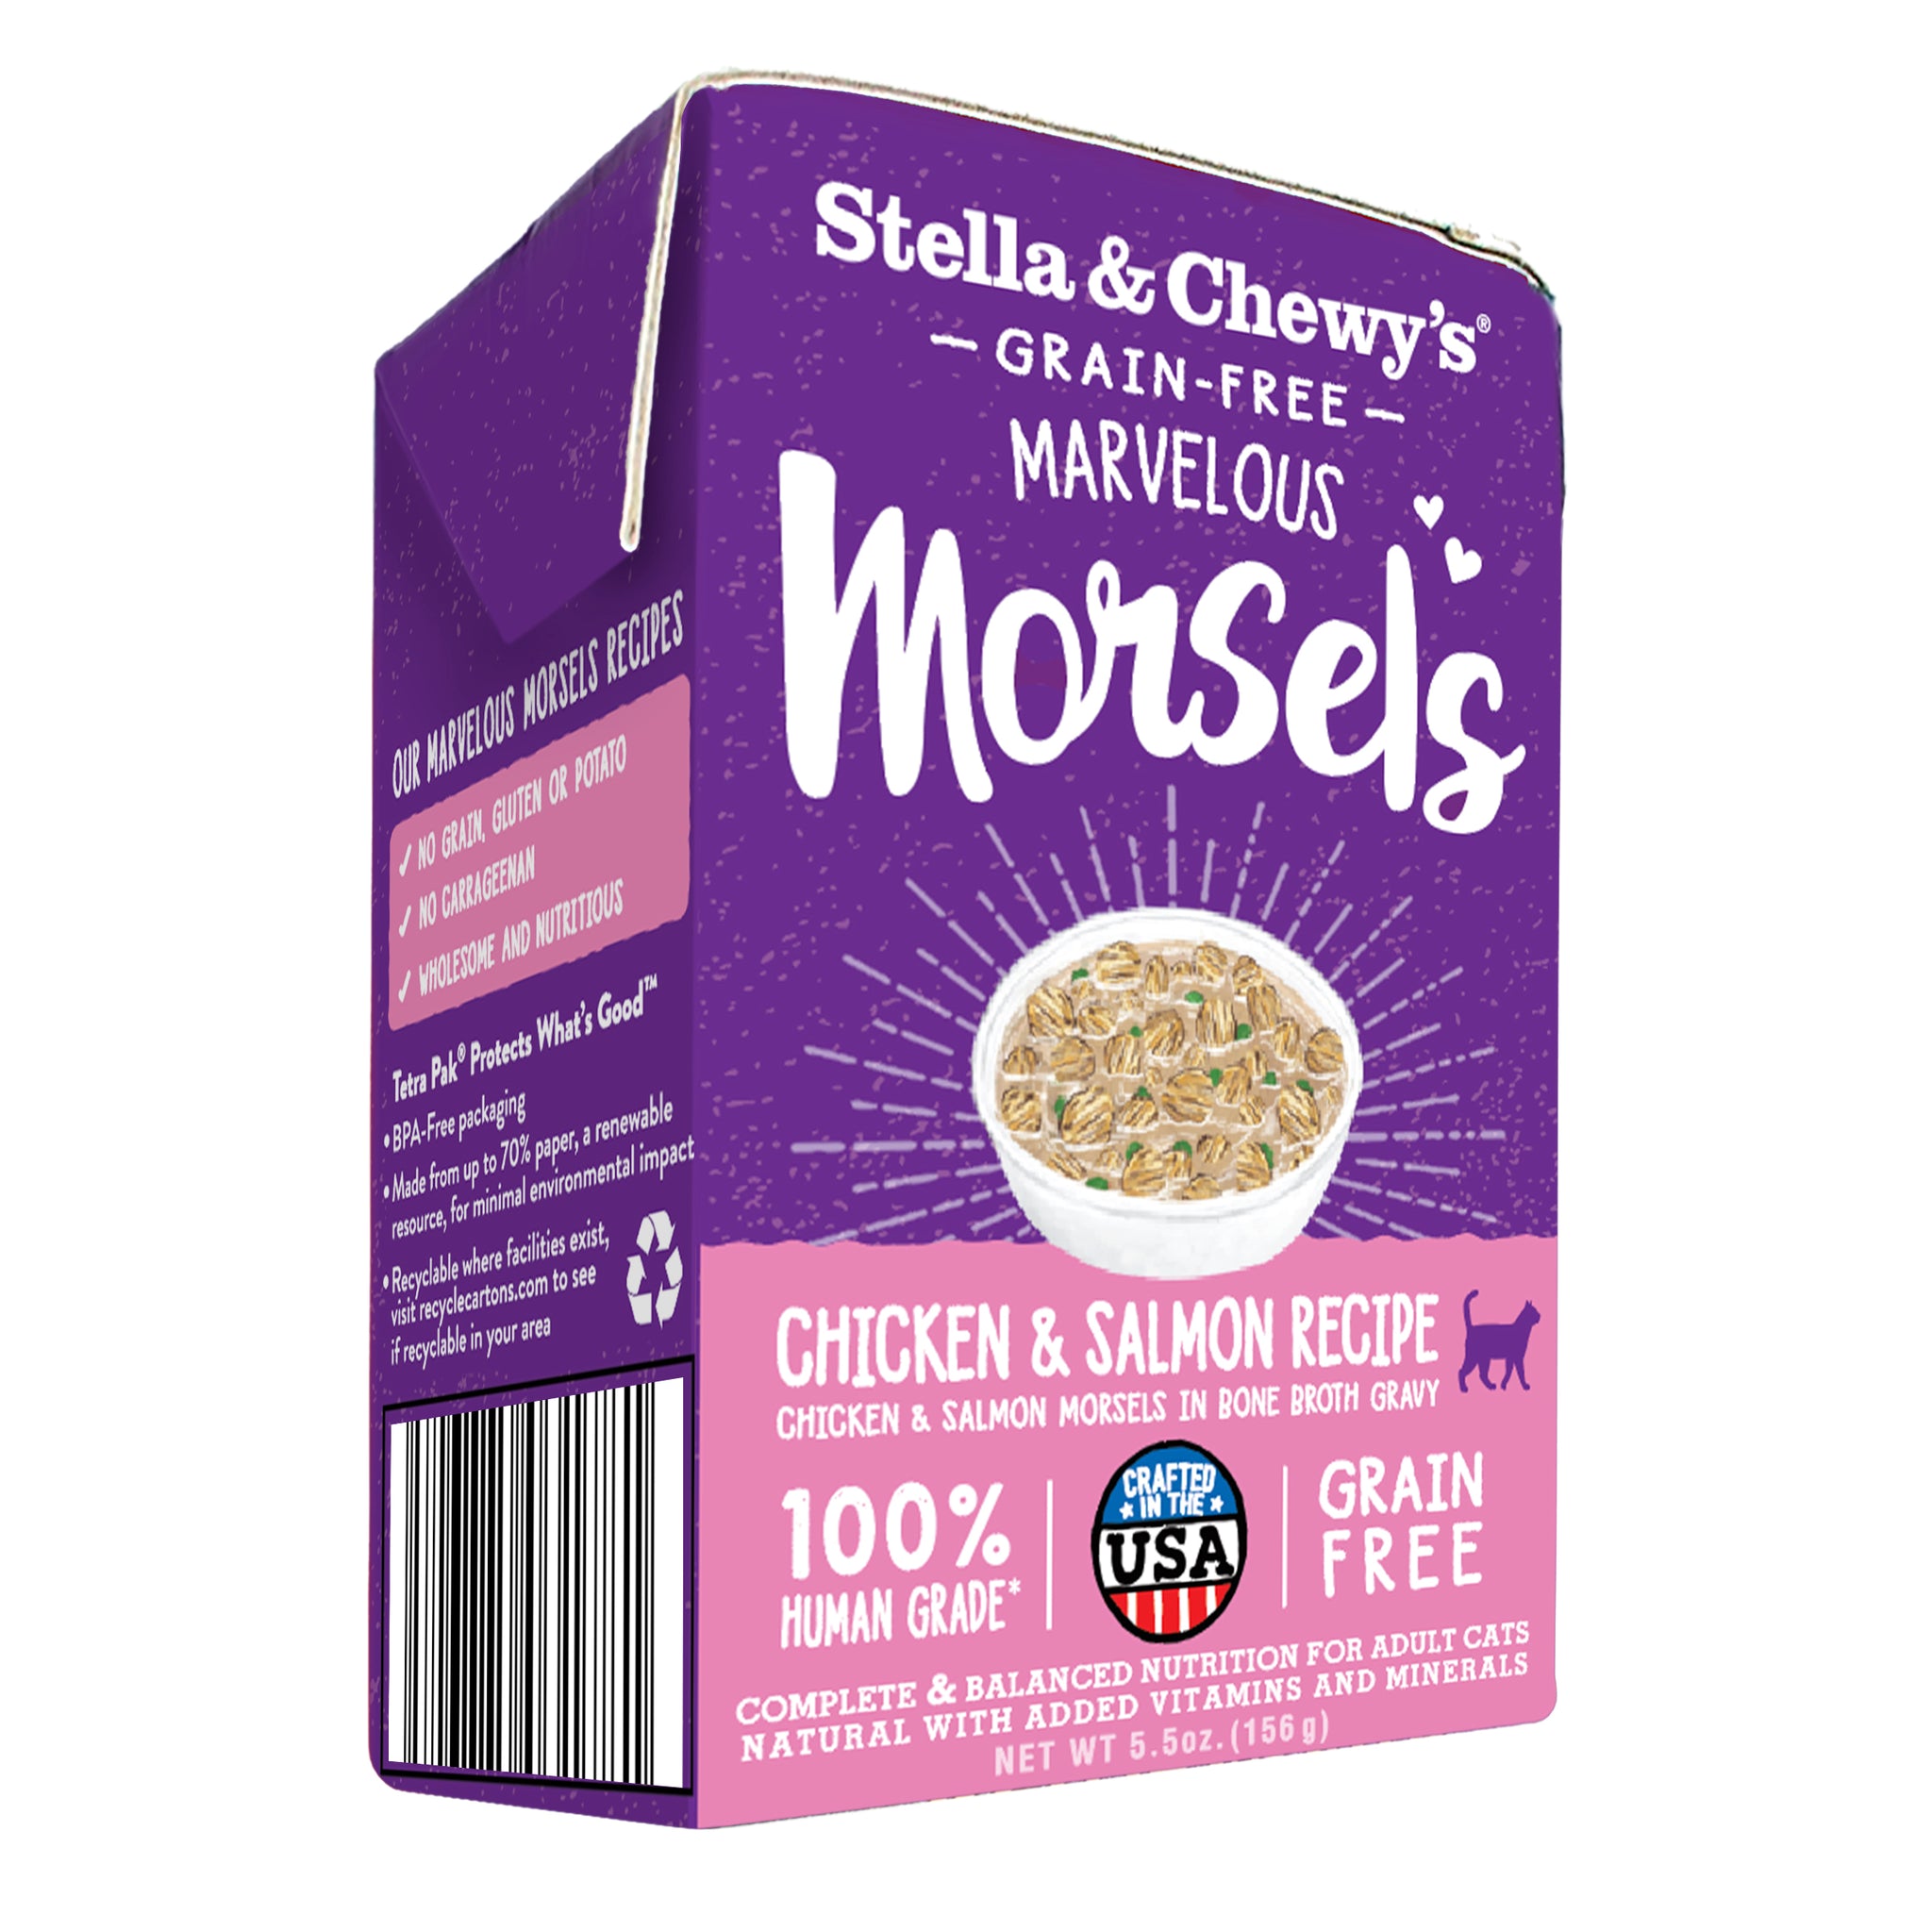 Stella & Chewy's Marvelous Morsels Chicken & Salmon Recipe Dog Food